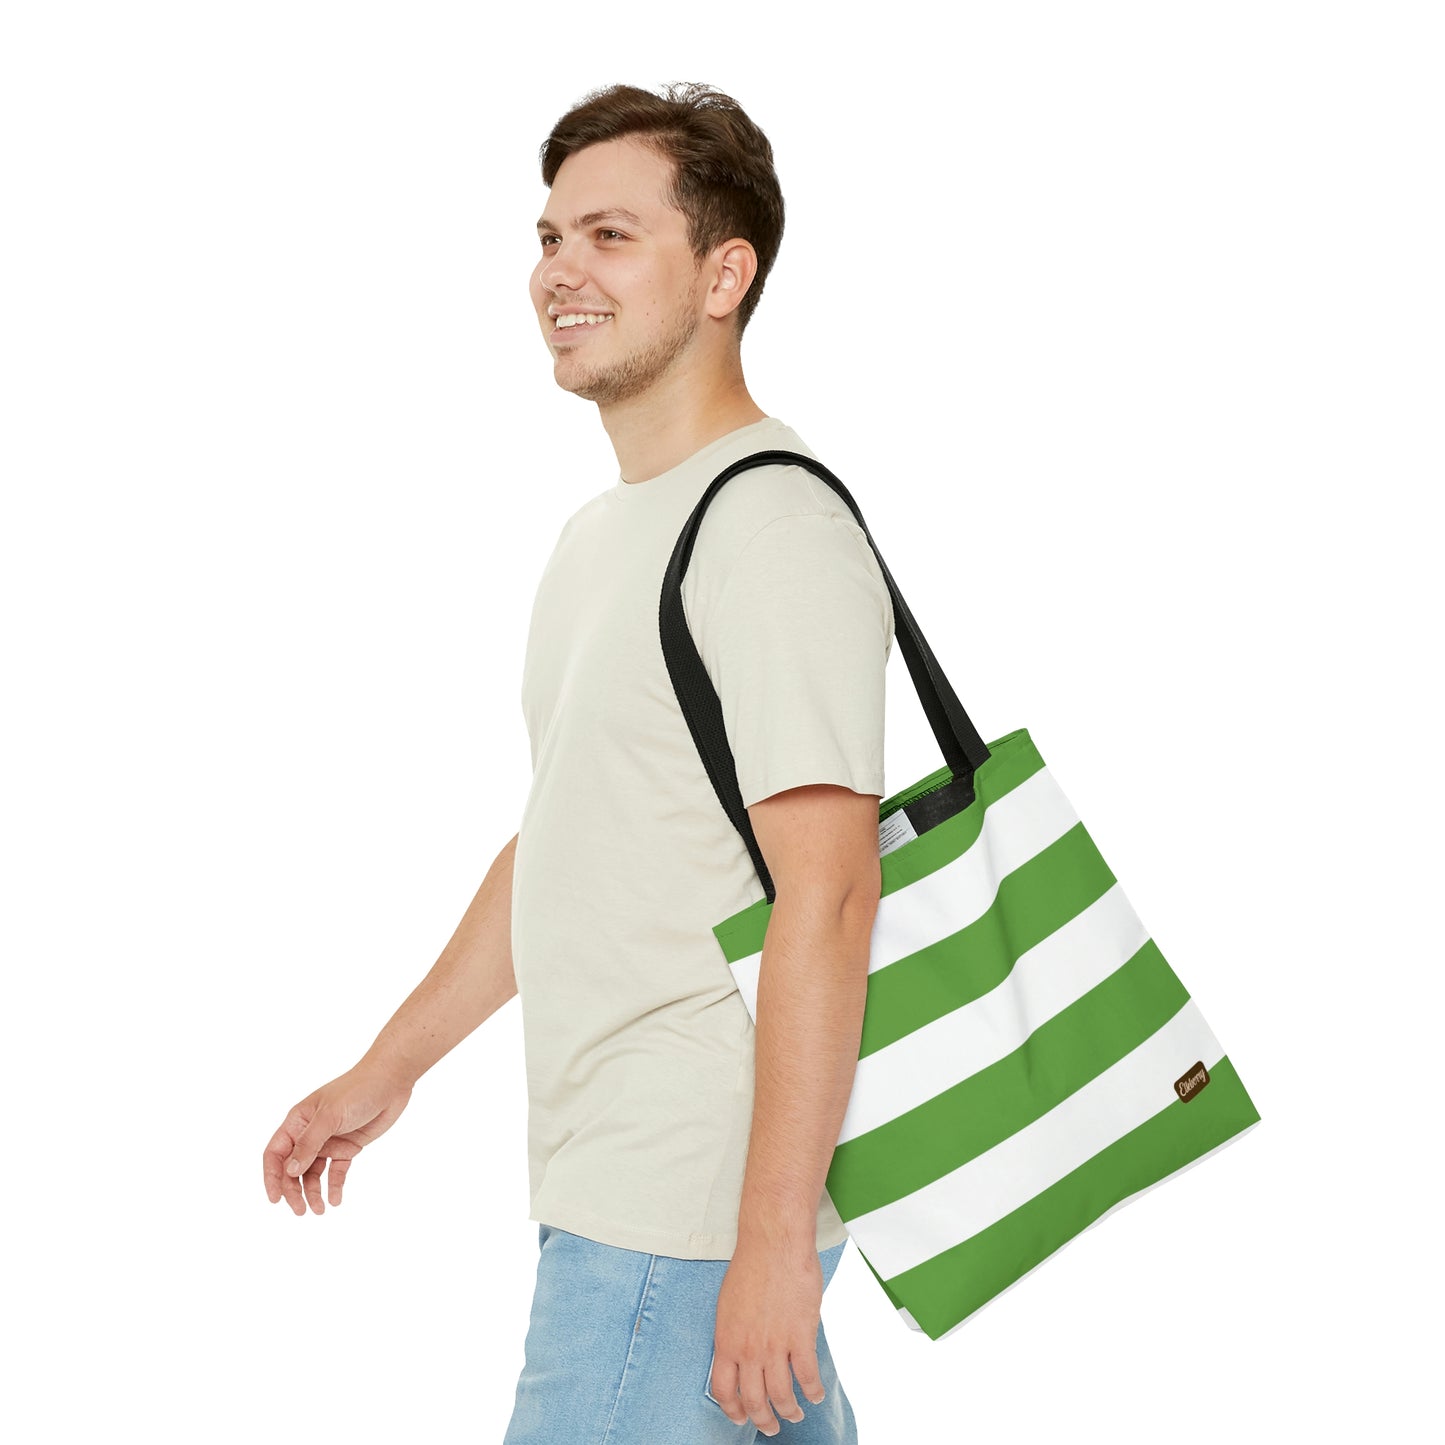 Lightweight Tote Bag - Lime Green/White Stripes